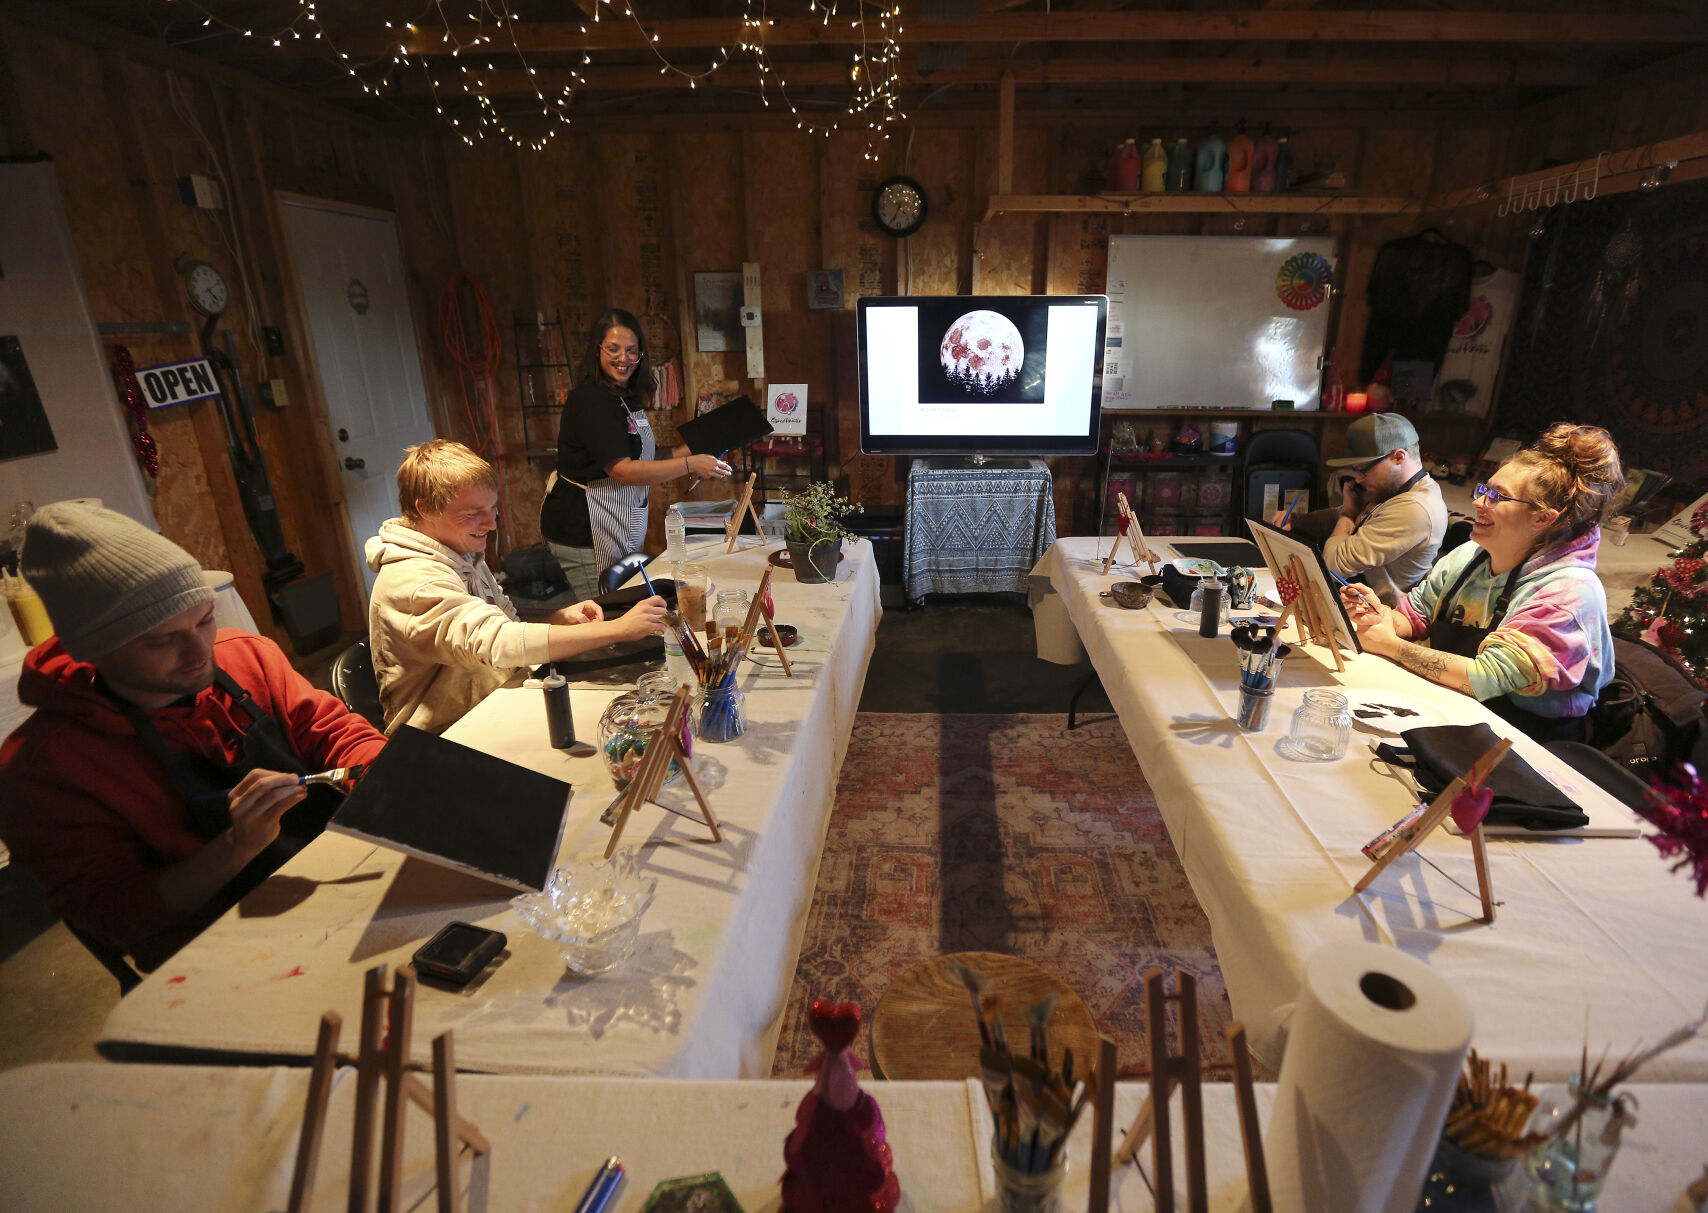 Maria Cigrand (top left), owner of The Stoned Painter, demonstrates to her students during a class in East Dubuque, Ill. The business mixes painting and cannabis for its participants.    PHOTO CREDIT: Dave Kettering
Telegraph Herald